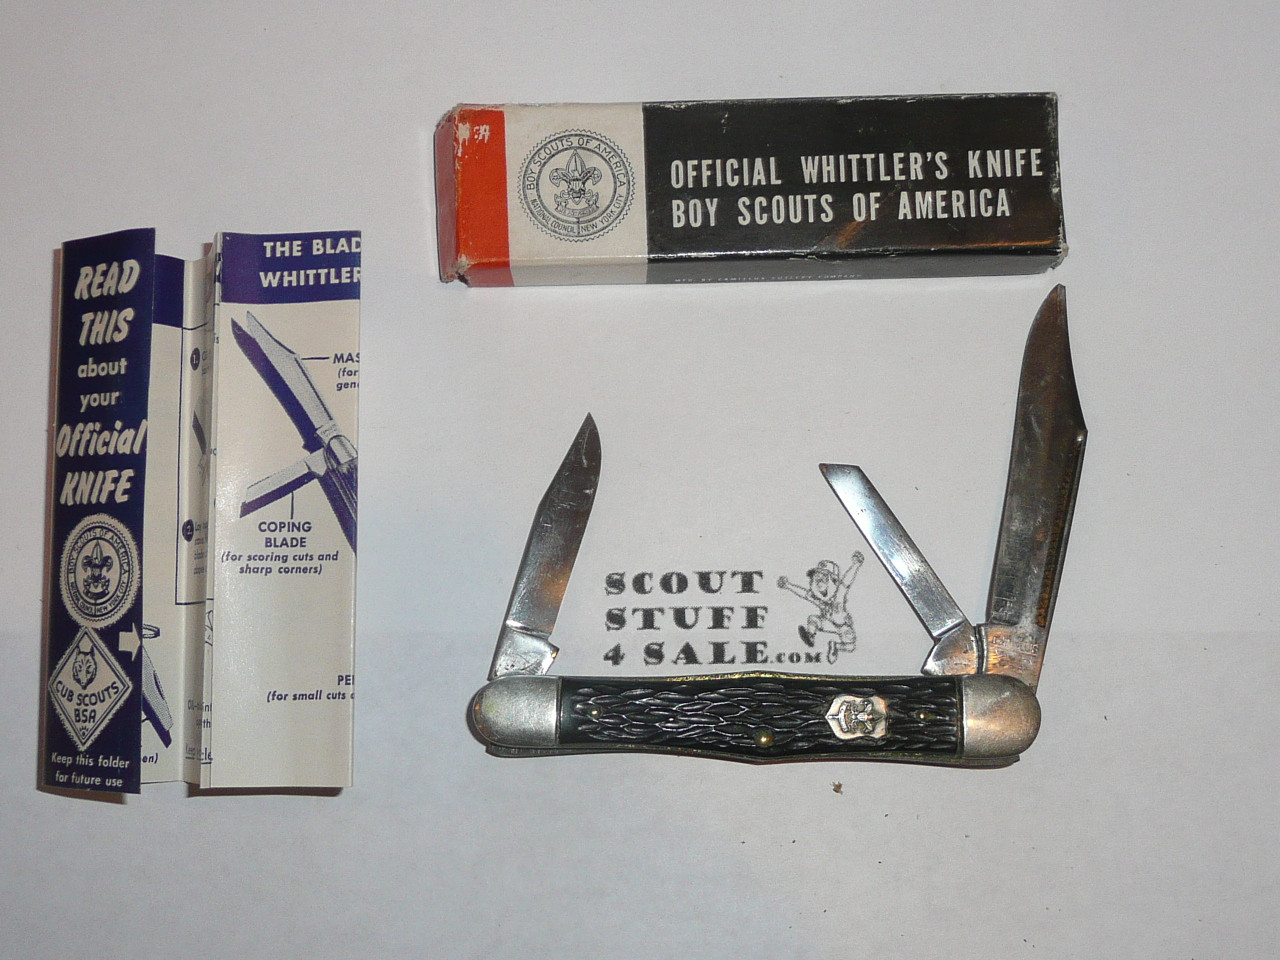 Boy Scout Knife, Camillus Manufacturer, Whittler's Knife with Box, used